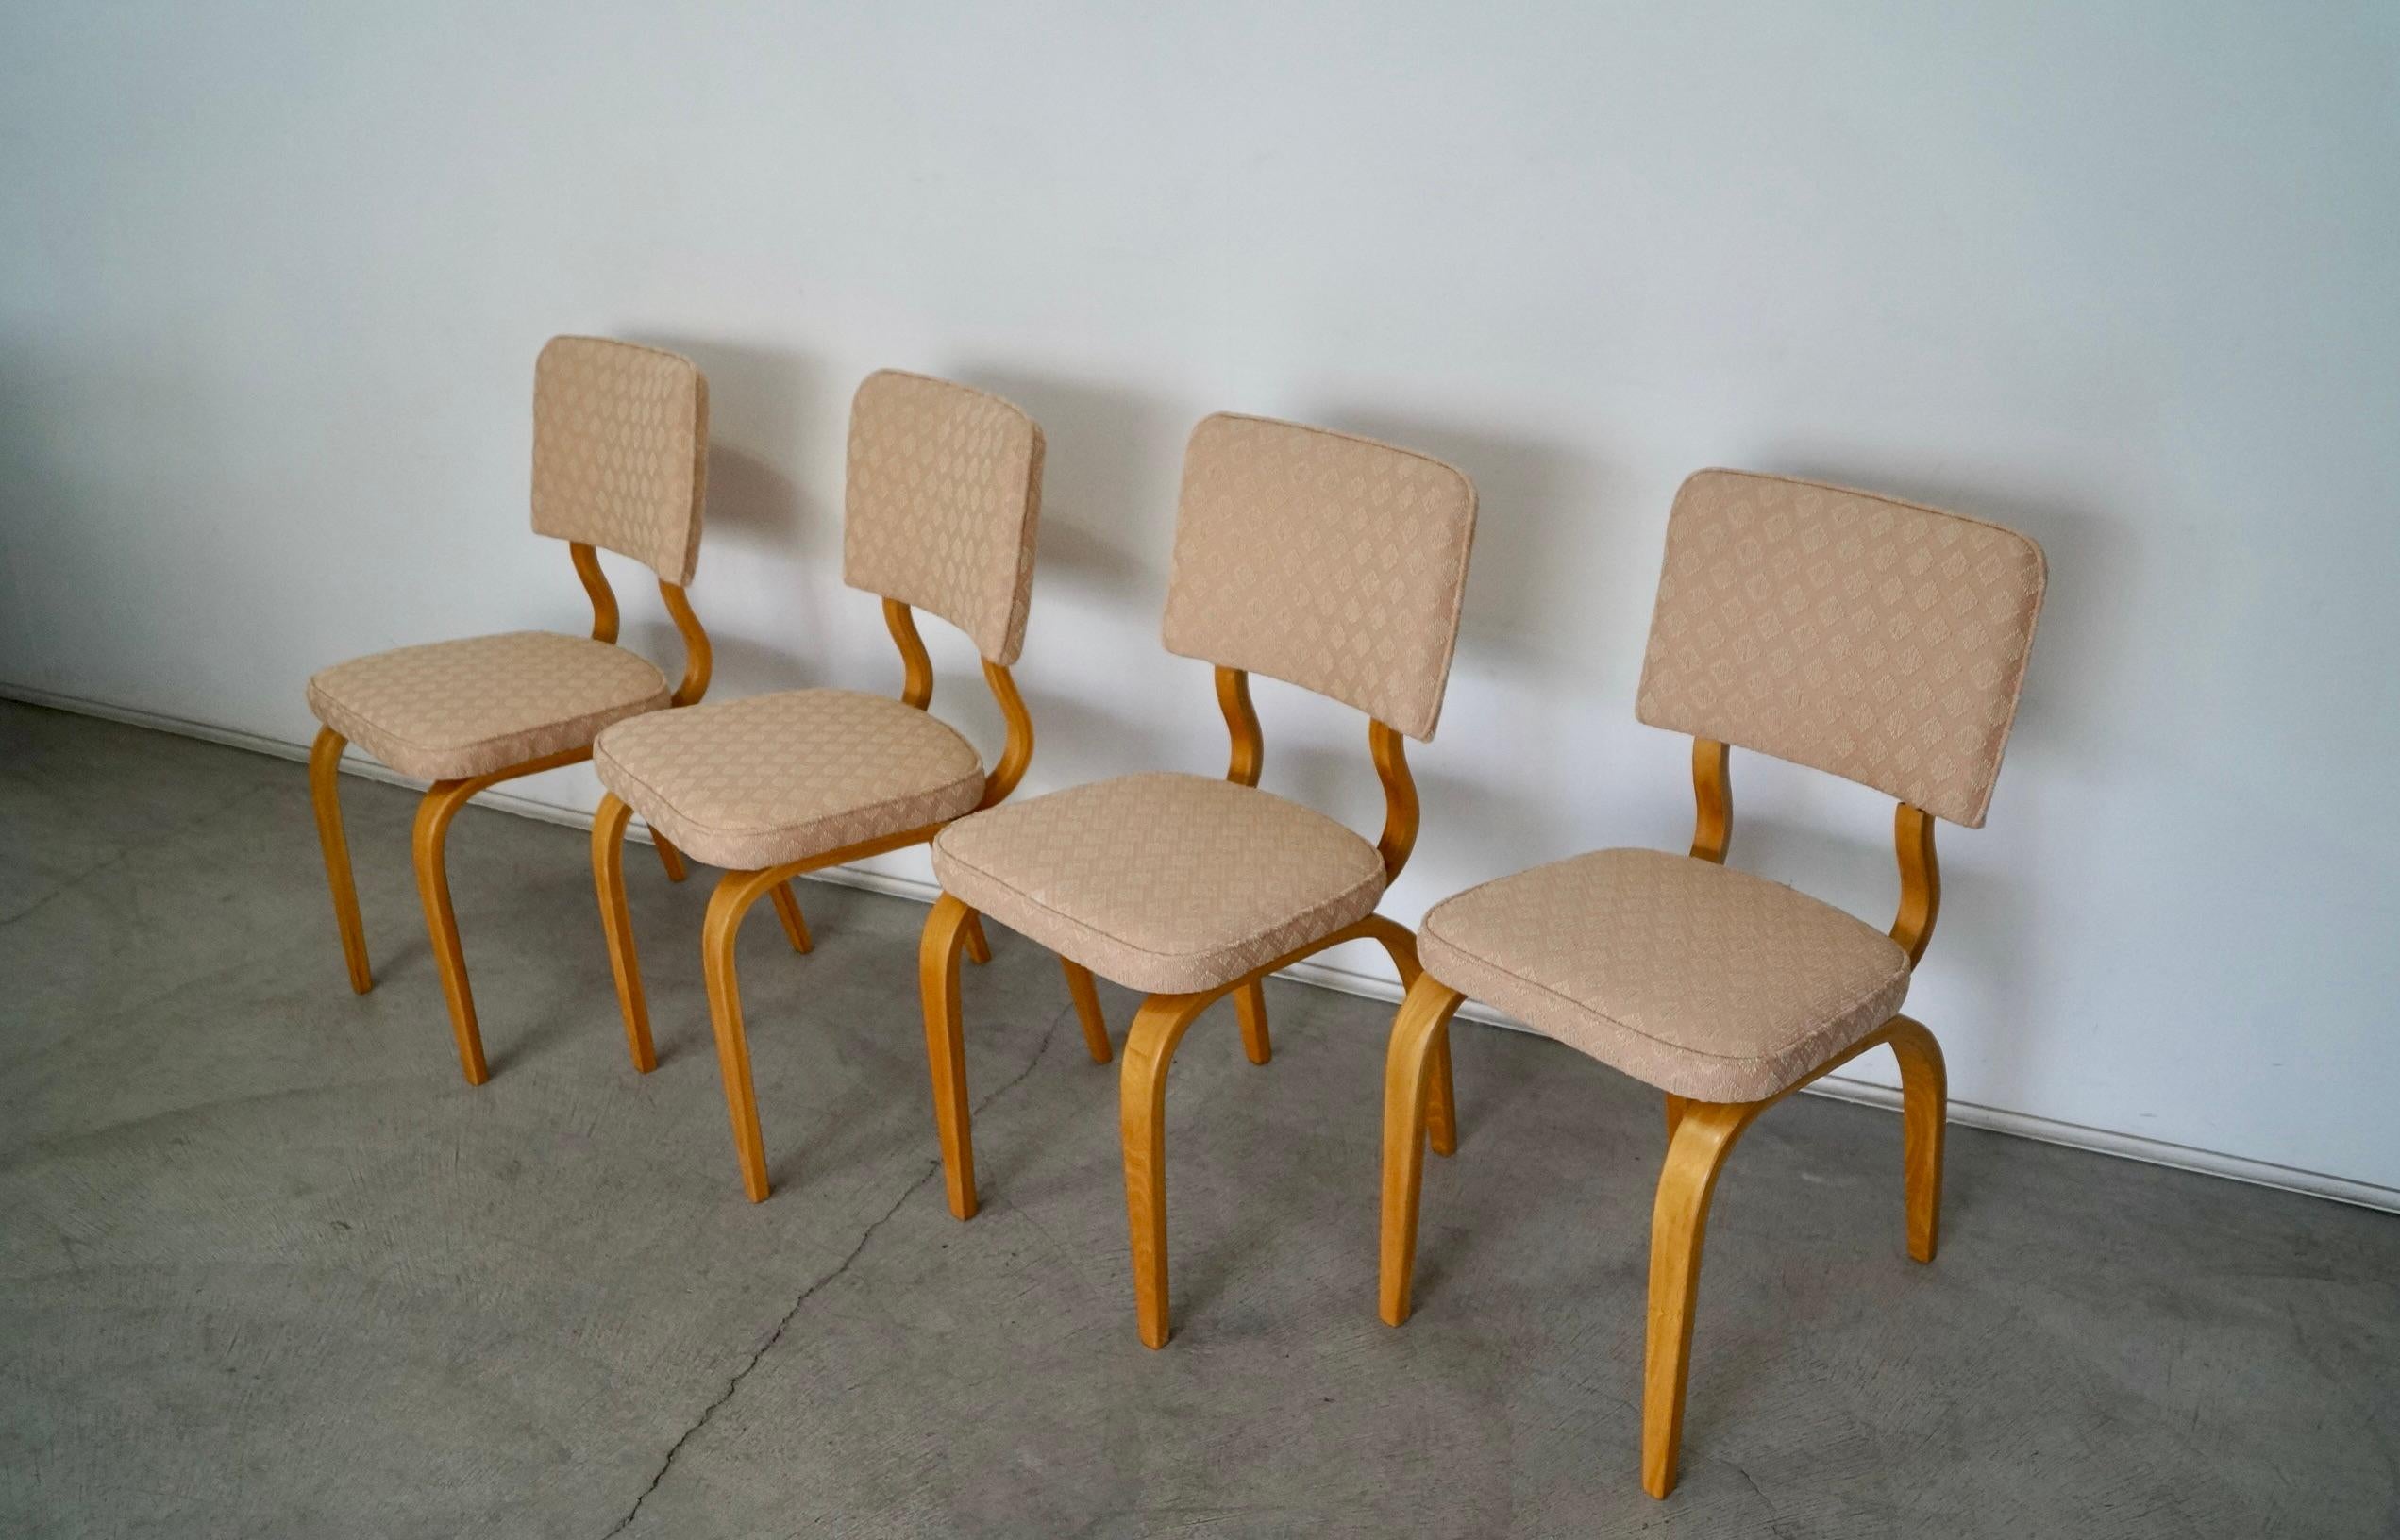 Vintage original 1950s Mid-Century Modern dining chairs for sale. They have a bentwood frame in ash that has been refinished in natural ash. They have been reupholstered in new fabric and foam. The fabric is a soft pale pink with white textured